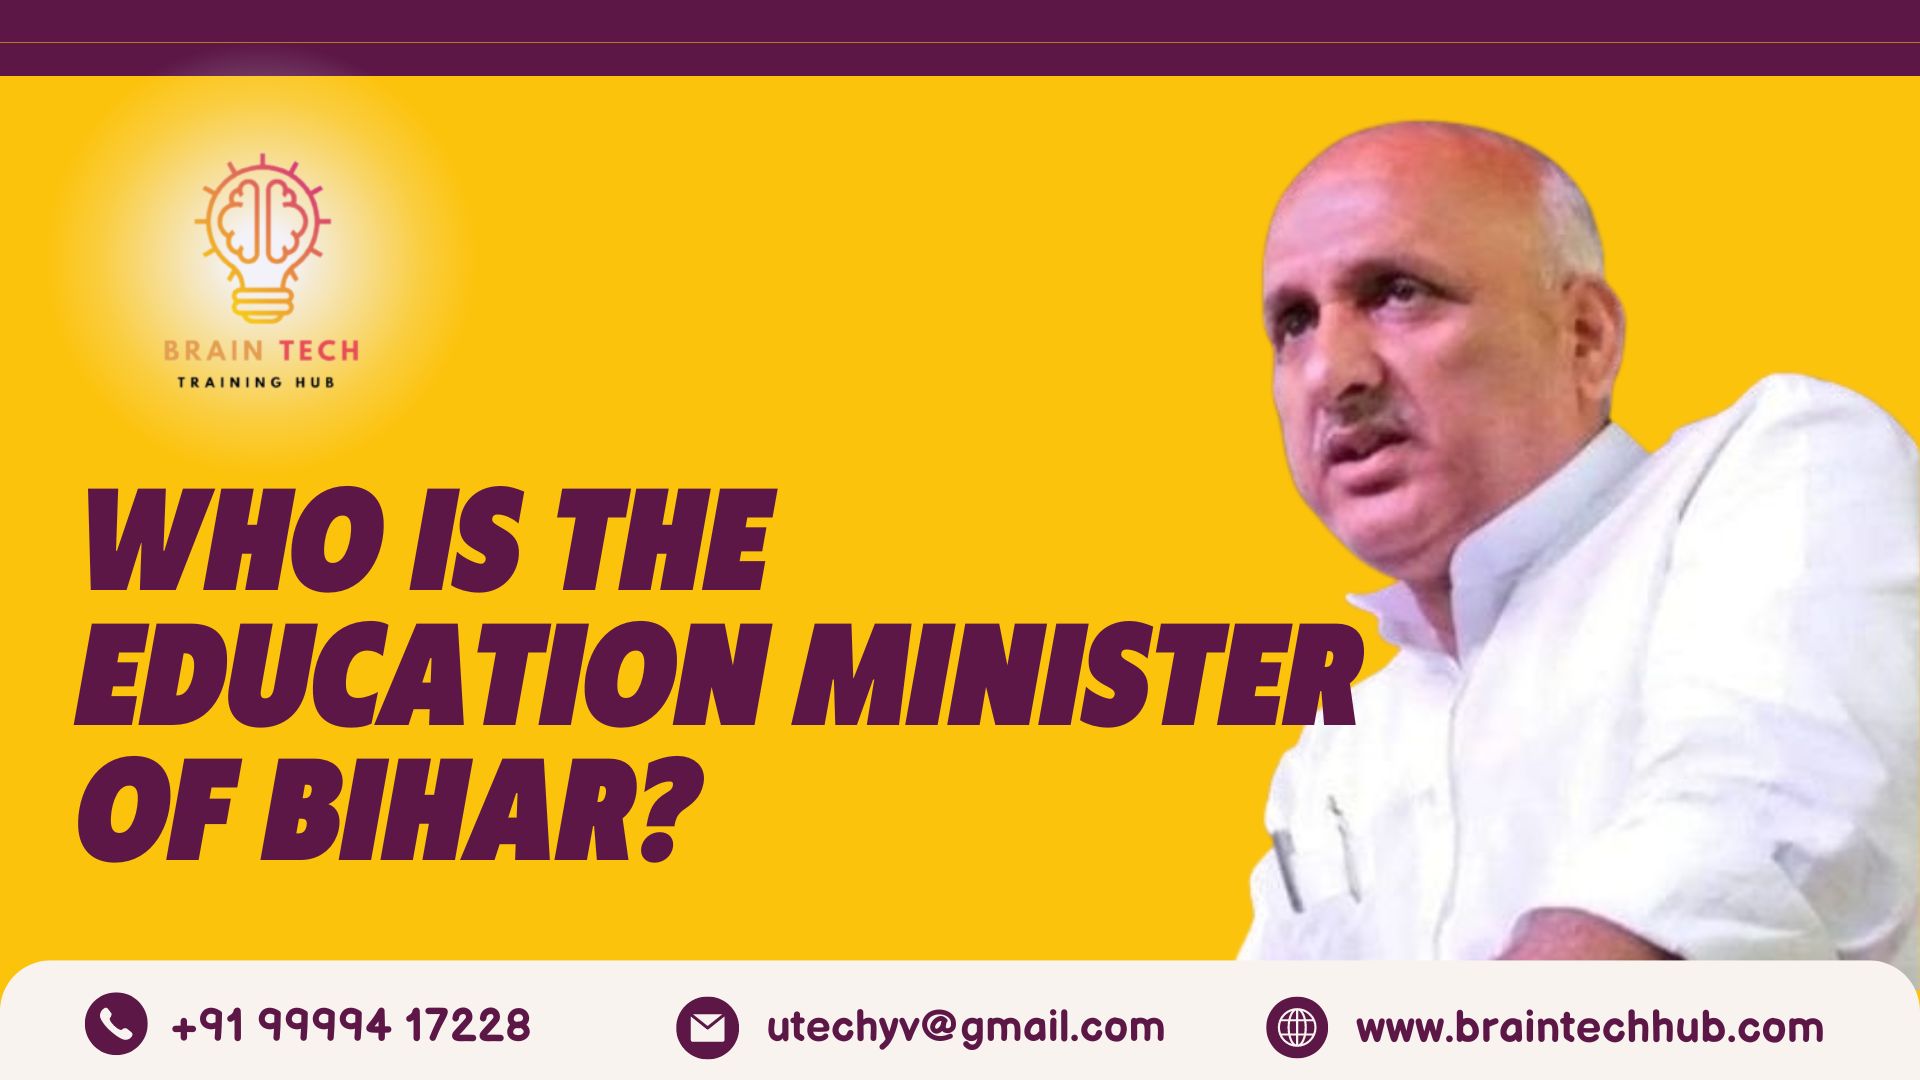 Who is the Education Minister of Bihar